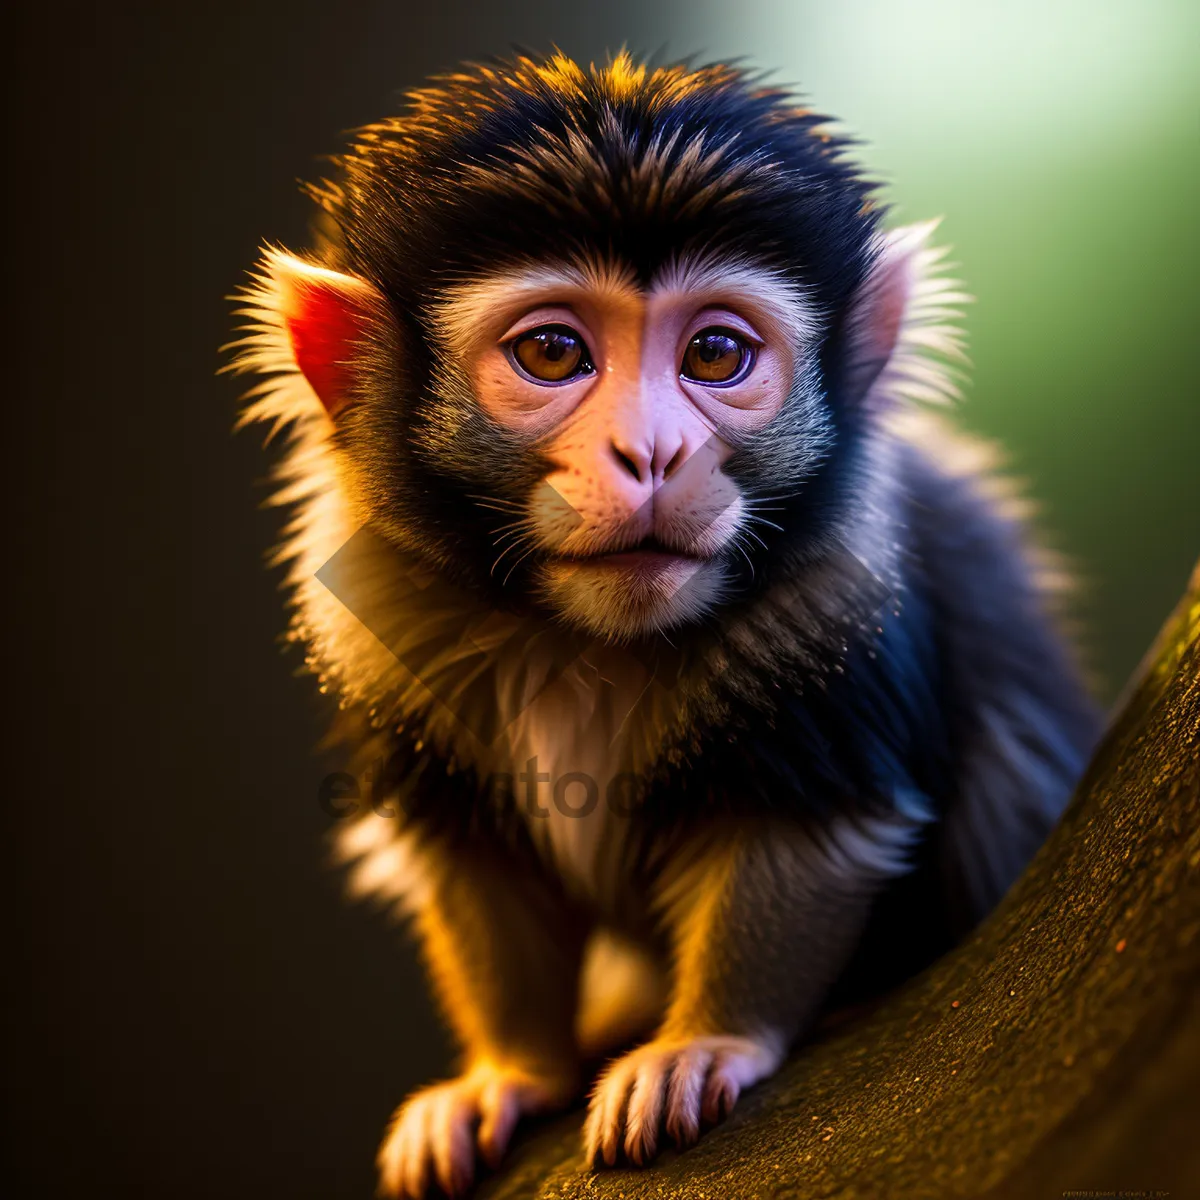 Picture of Adorable baby monkey in the wild.